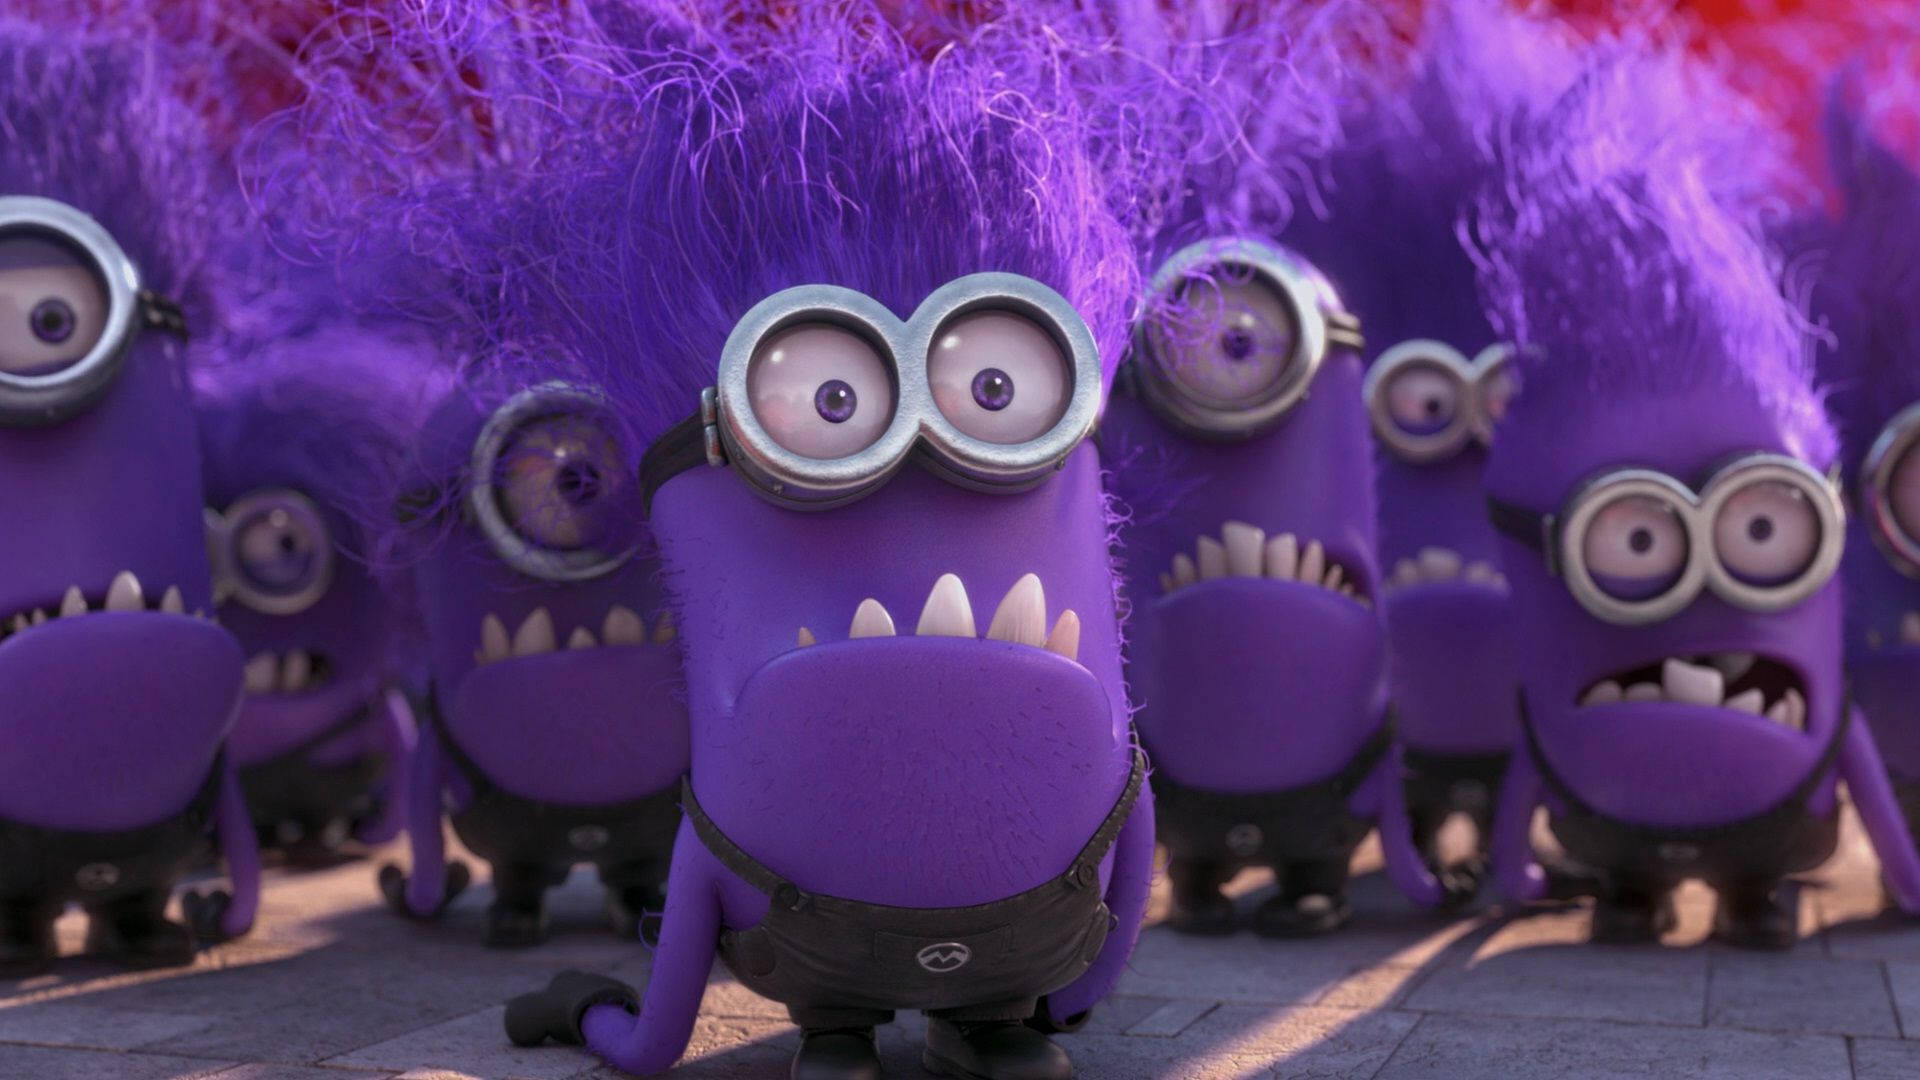 Group Of Evil Minion